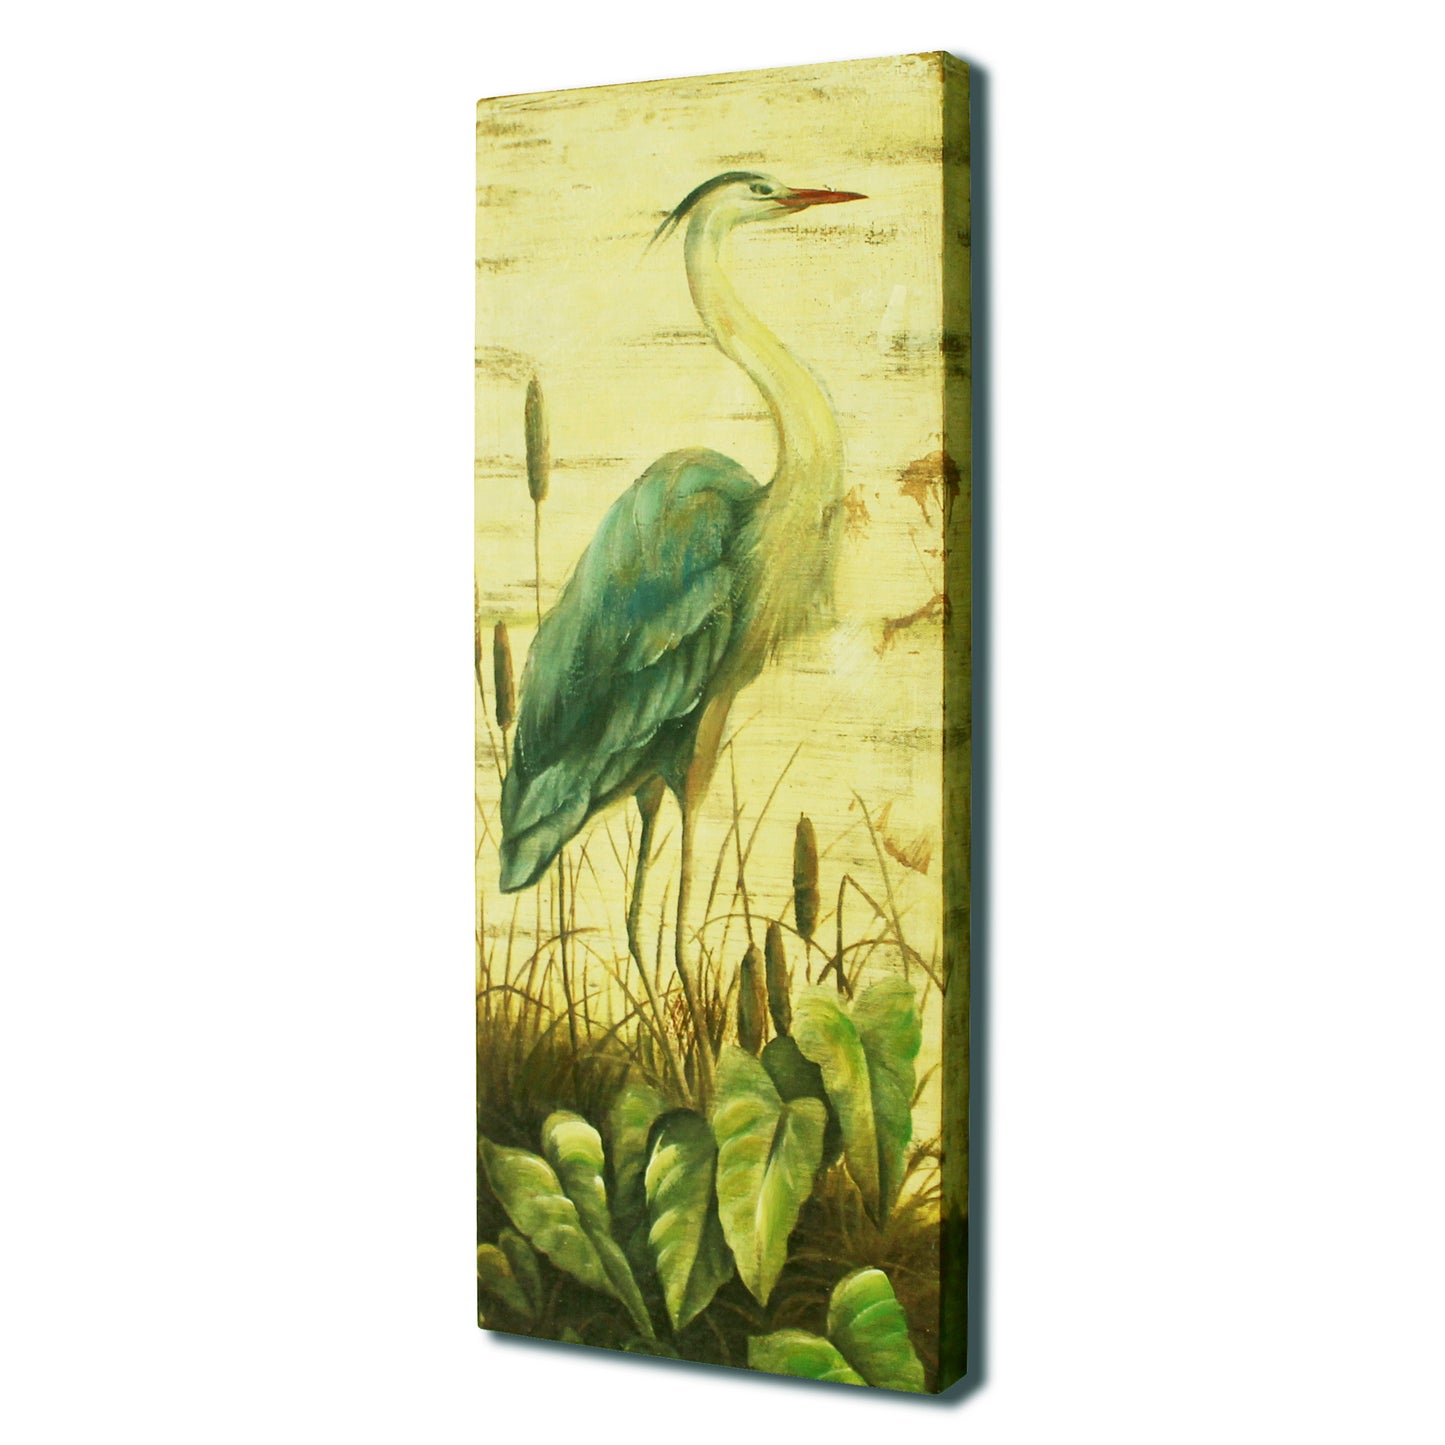 CVHOMEDECO. Primitives Rustic Hand Painted Wooden Frame Wall Hanging 3D Painting Decoration Art, Red-Crowned Crane Design, 8 x 19.75 Inch